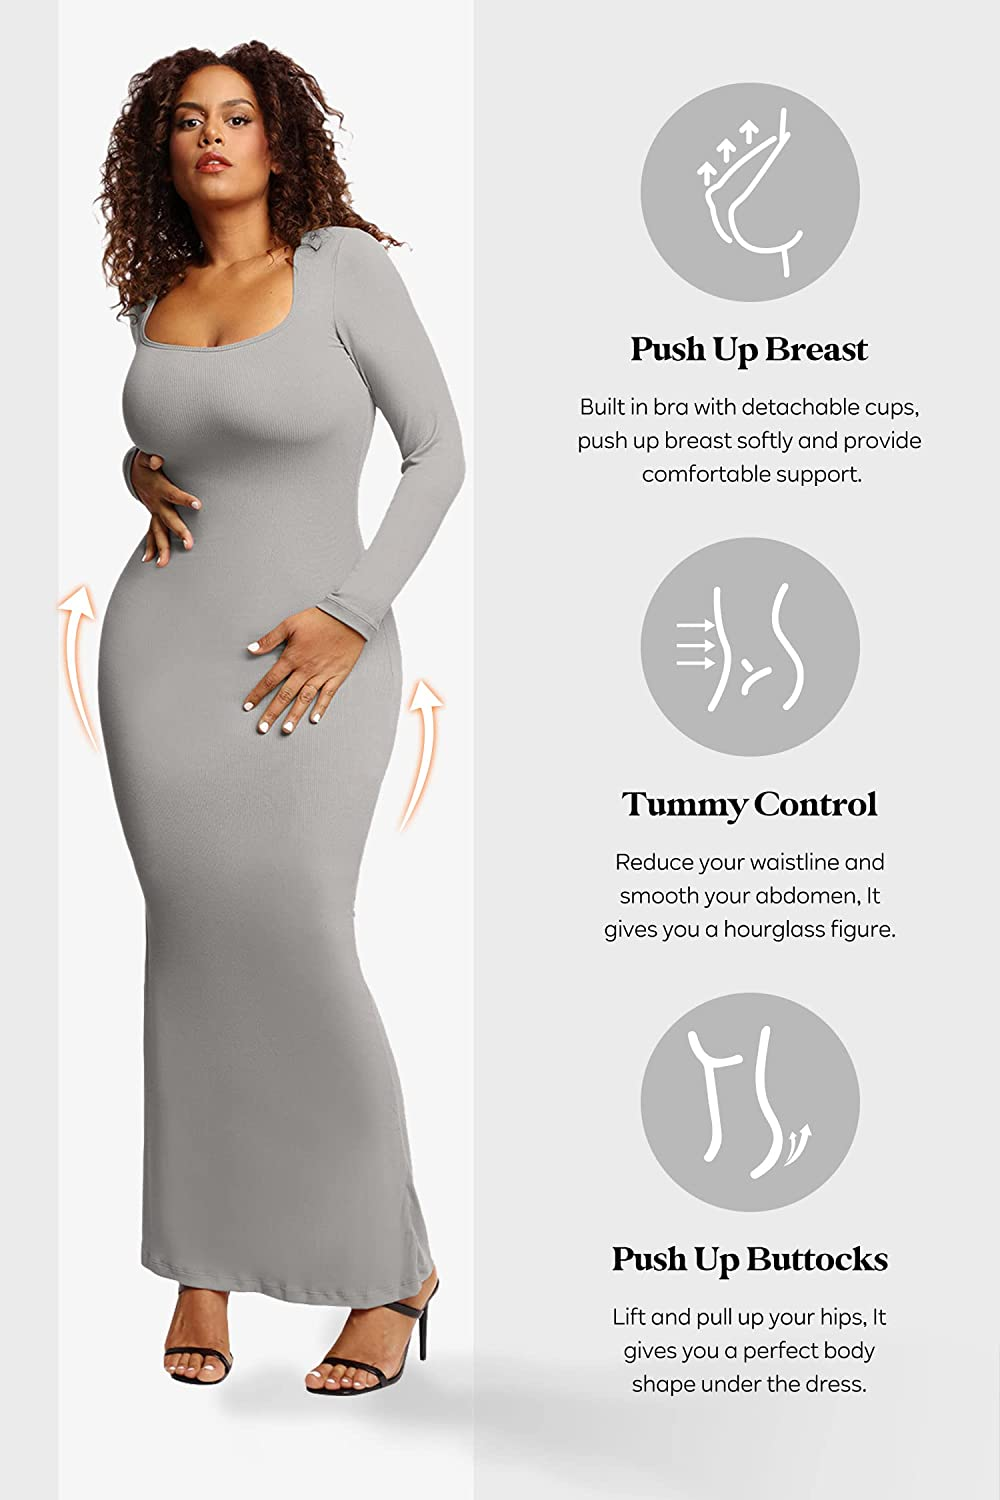 SKIMS - A new way to contour. Shape, support, and round your bust